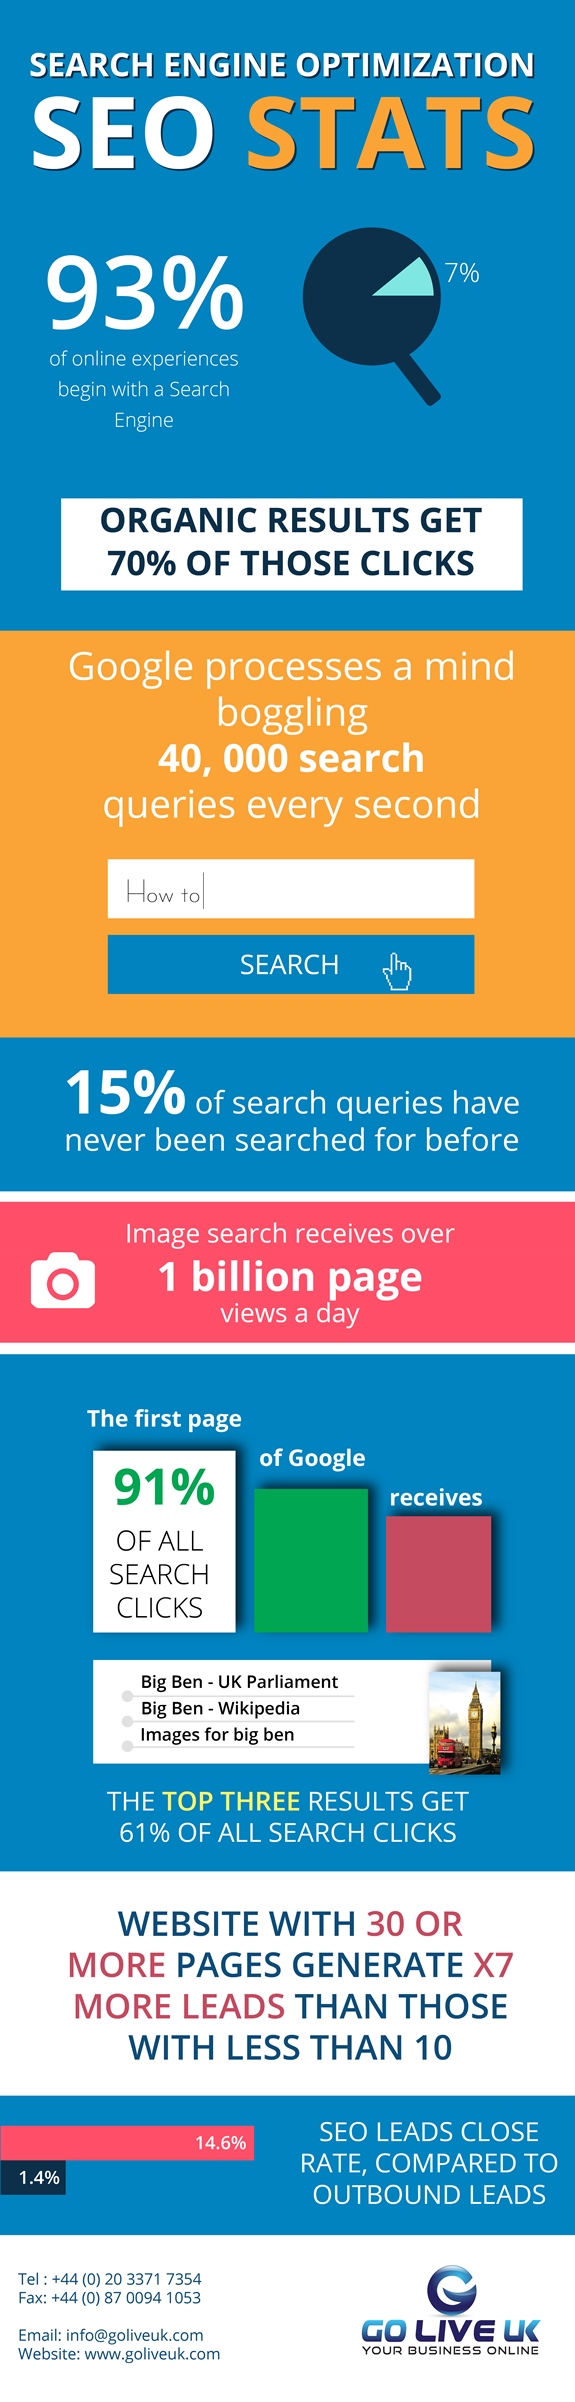 9 Search Engine Optimisation Stats That Will Make You Rethink Your Marketing Strategy [Infographic]